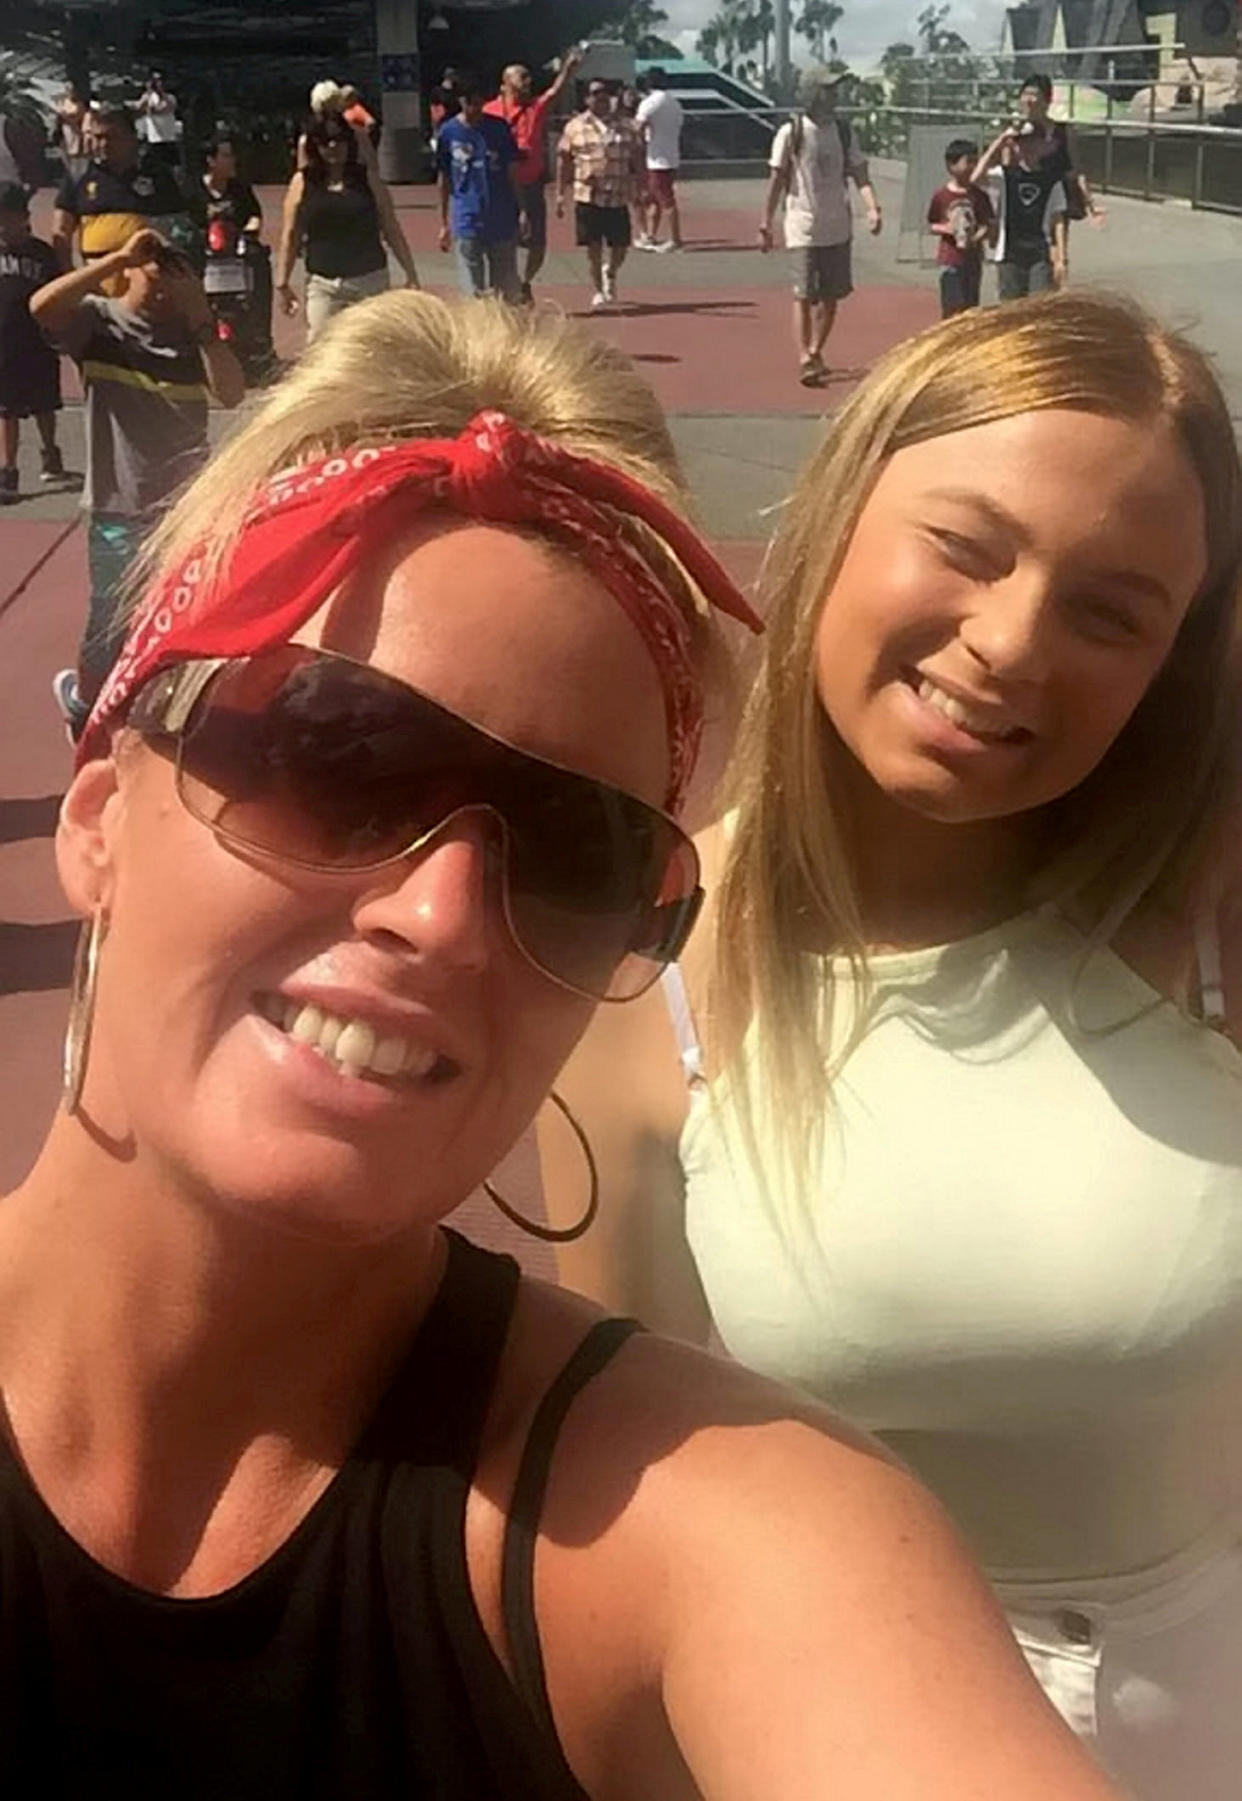 Stacey Baigan (left), who is six months pregnant, said mental health had become another pandemic in the course of lockdowns, and many young people were feeling isolated like her daughter Leonie (right). (SWNS)